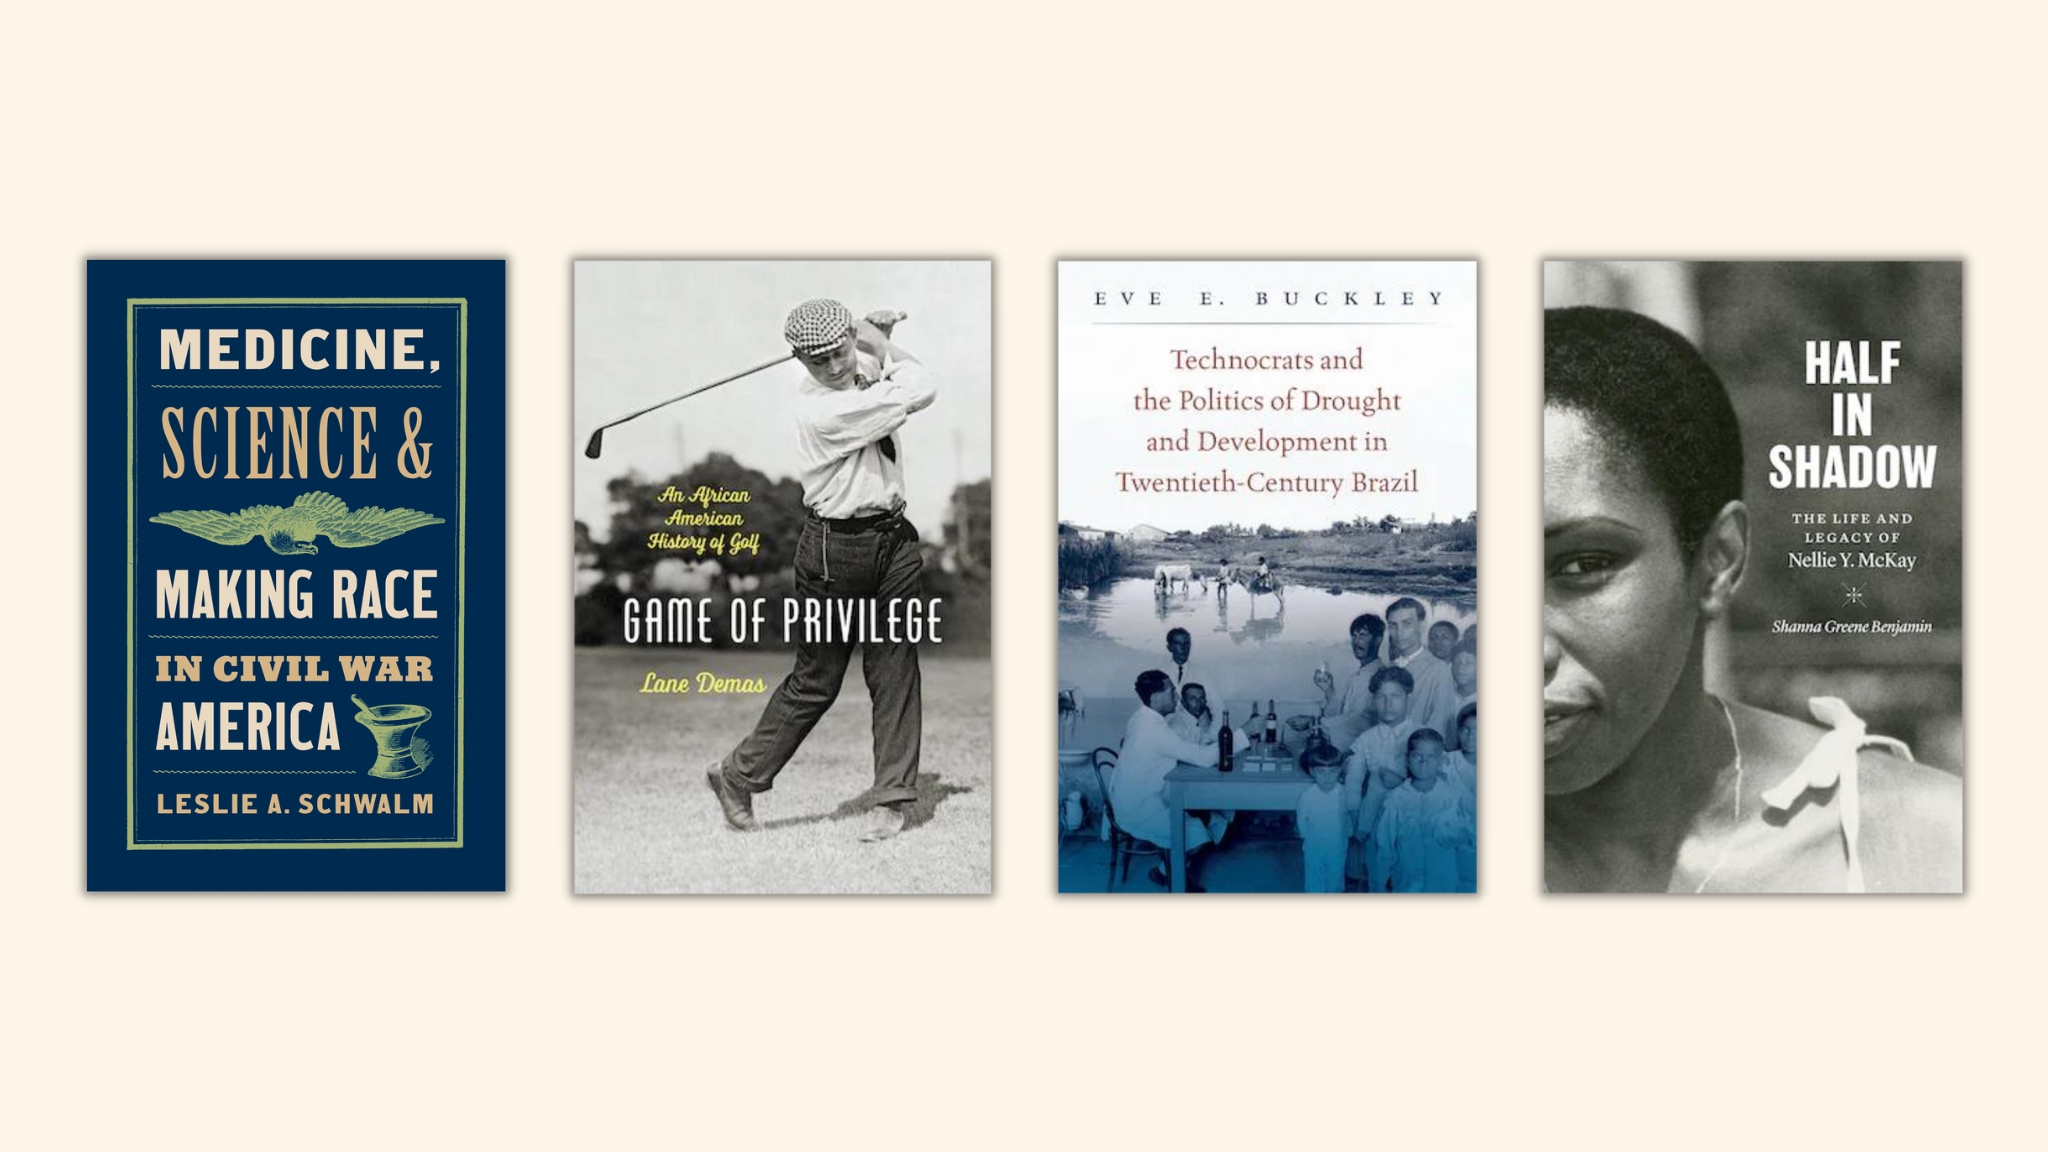 NEH Announces Fellowships Open Book Awards  The National Endowment for the  Humanities